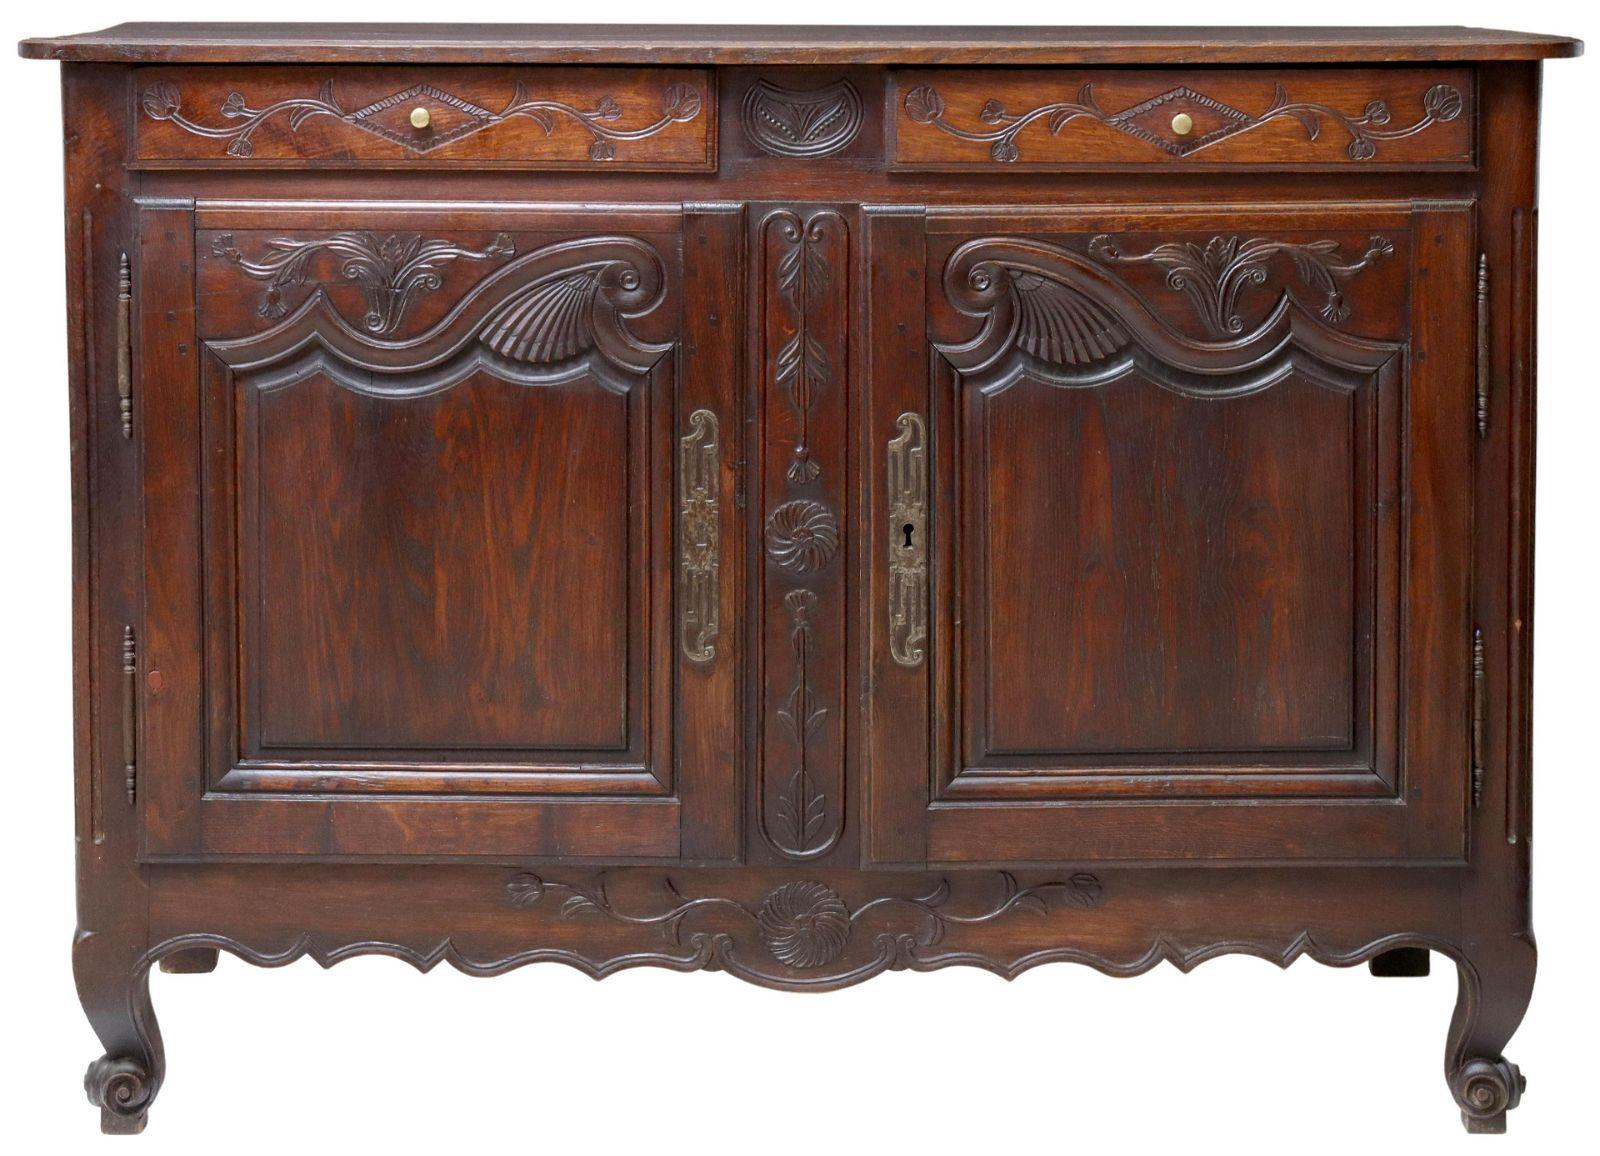 French Louis XV style oak sideboard, late 19th c., two drawers, over two cabinet doors, scalloped apron, rising on whorl feet. Detailed carving on each door panel.

Dimensions: approx 39